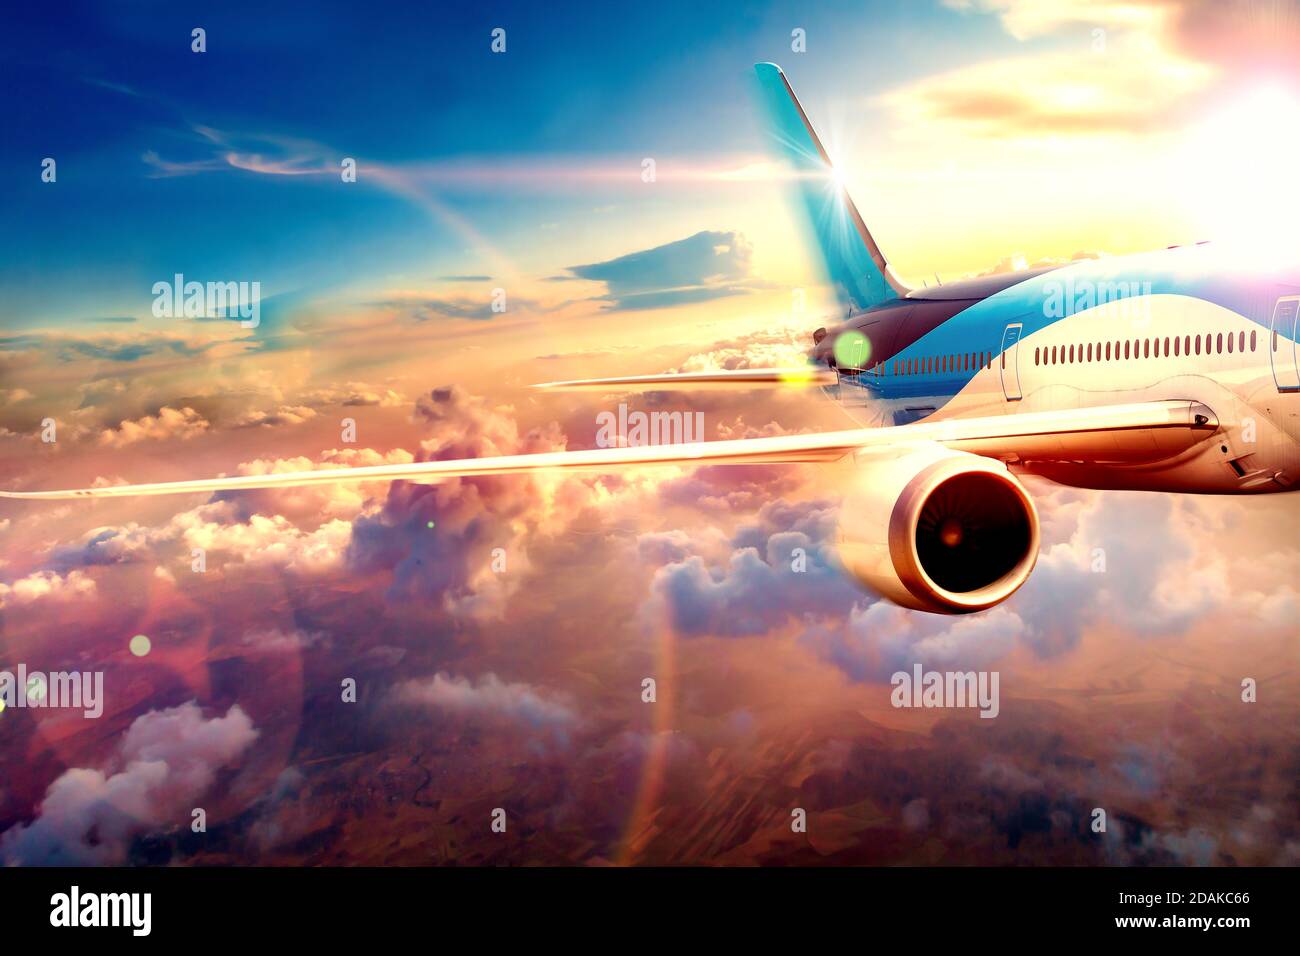 Aeroplane and scenic sunset.Vacations and tourism flying around the world. Concept of air travel and adventures background Stock Photo